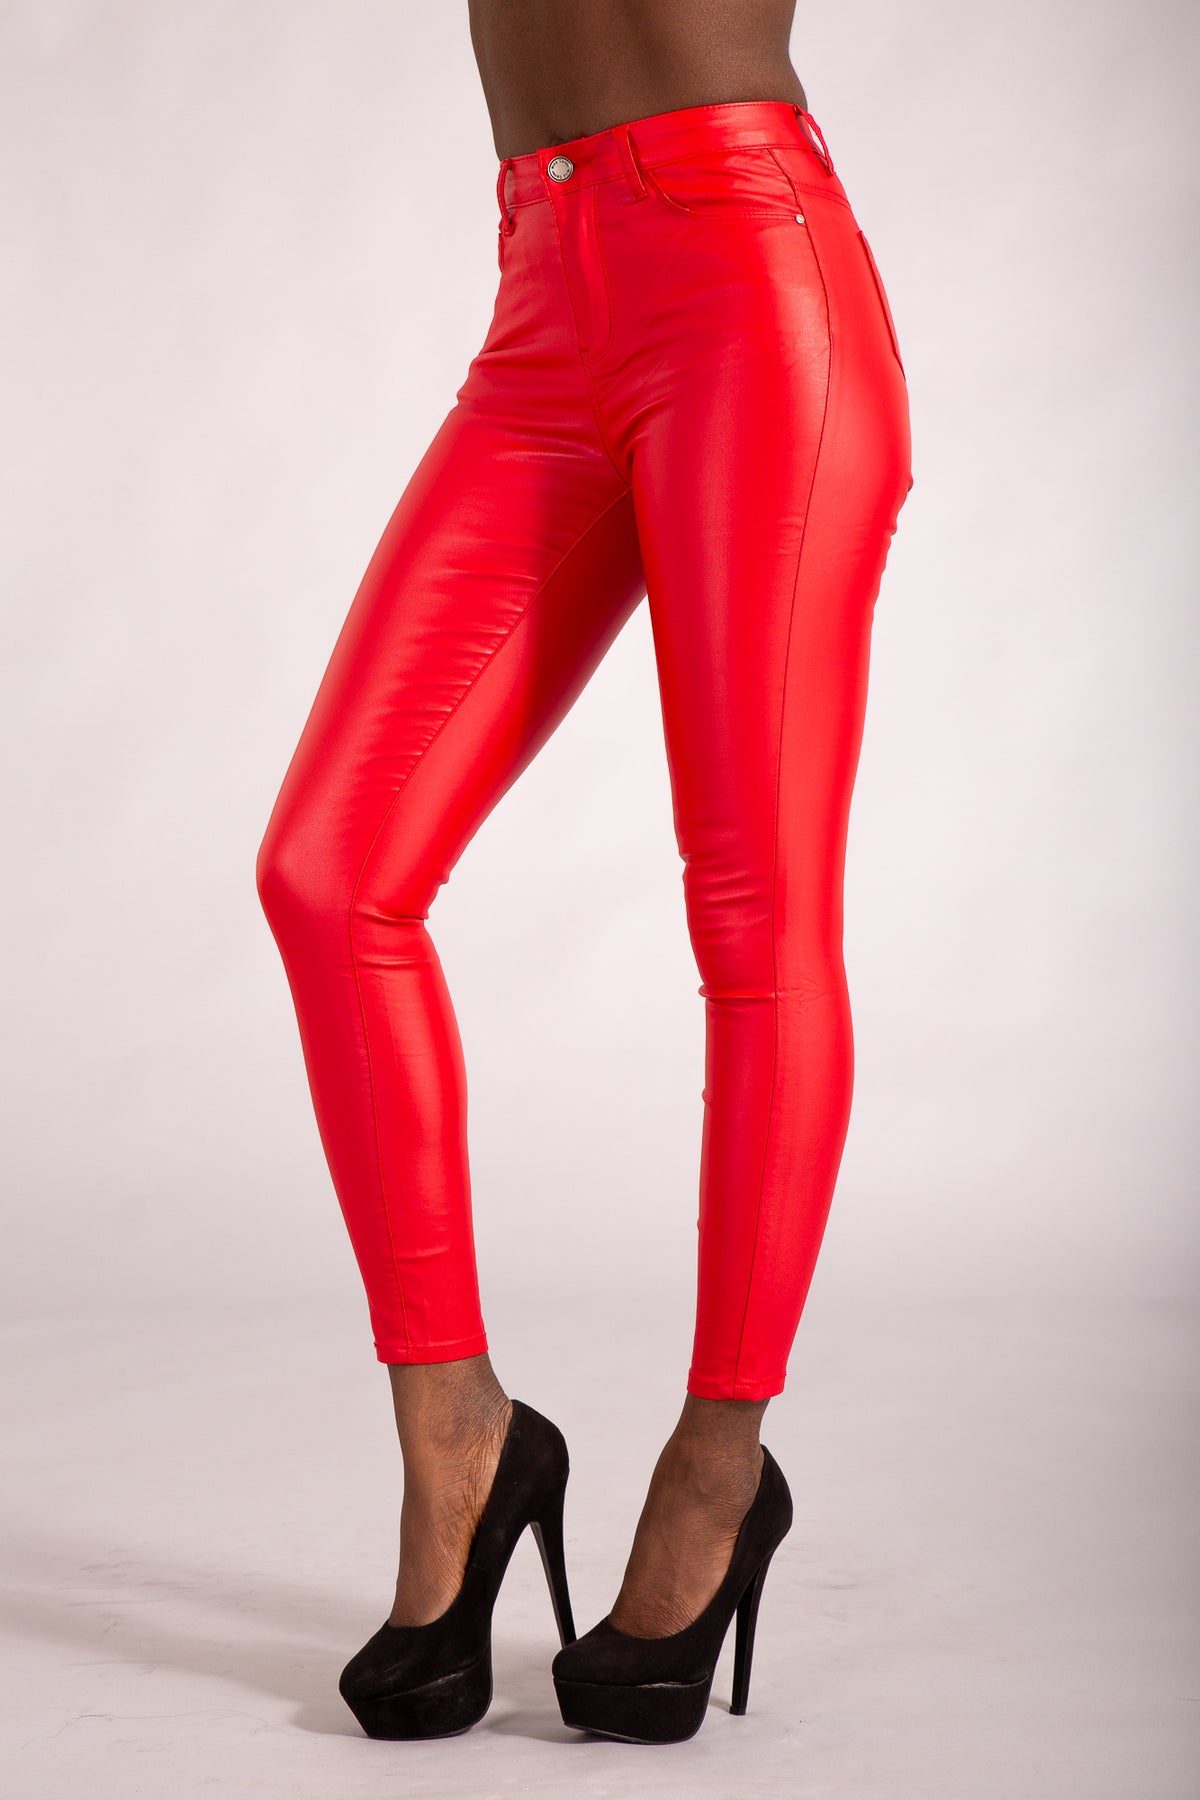 Kandy Red Leather Look Leggings from Denim Crush – Lusty Chic